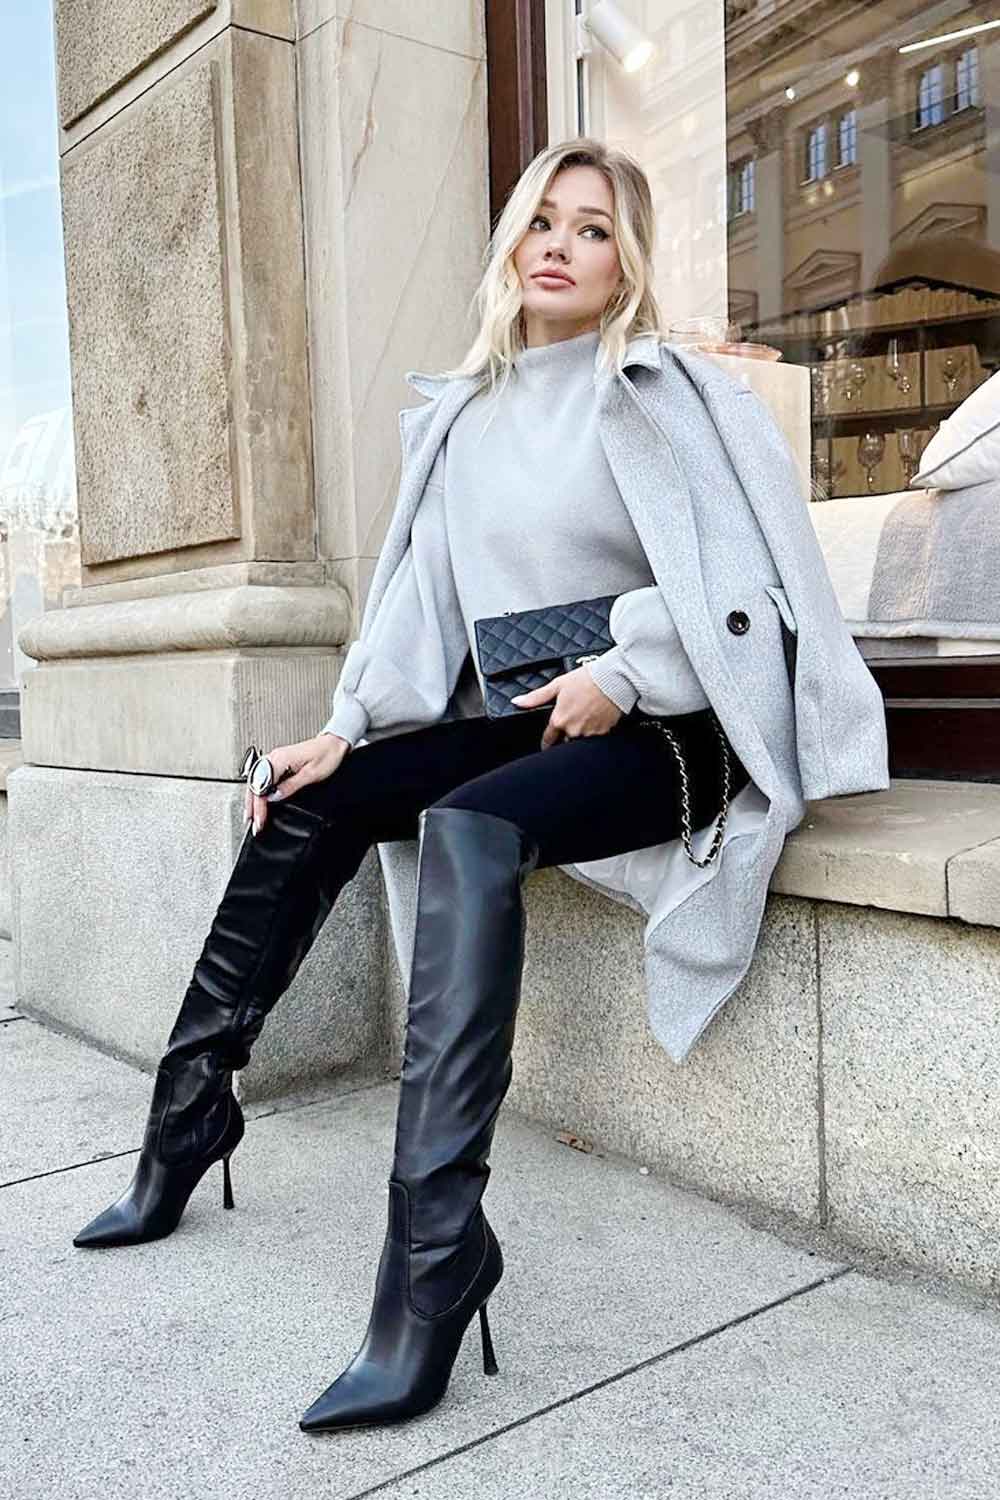 How to Wear Ankle Boots with Dress Pants - A Woman's Guide